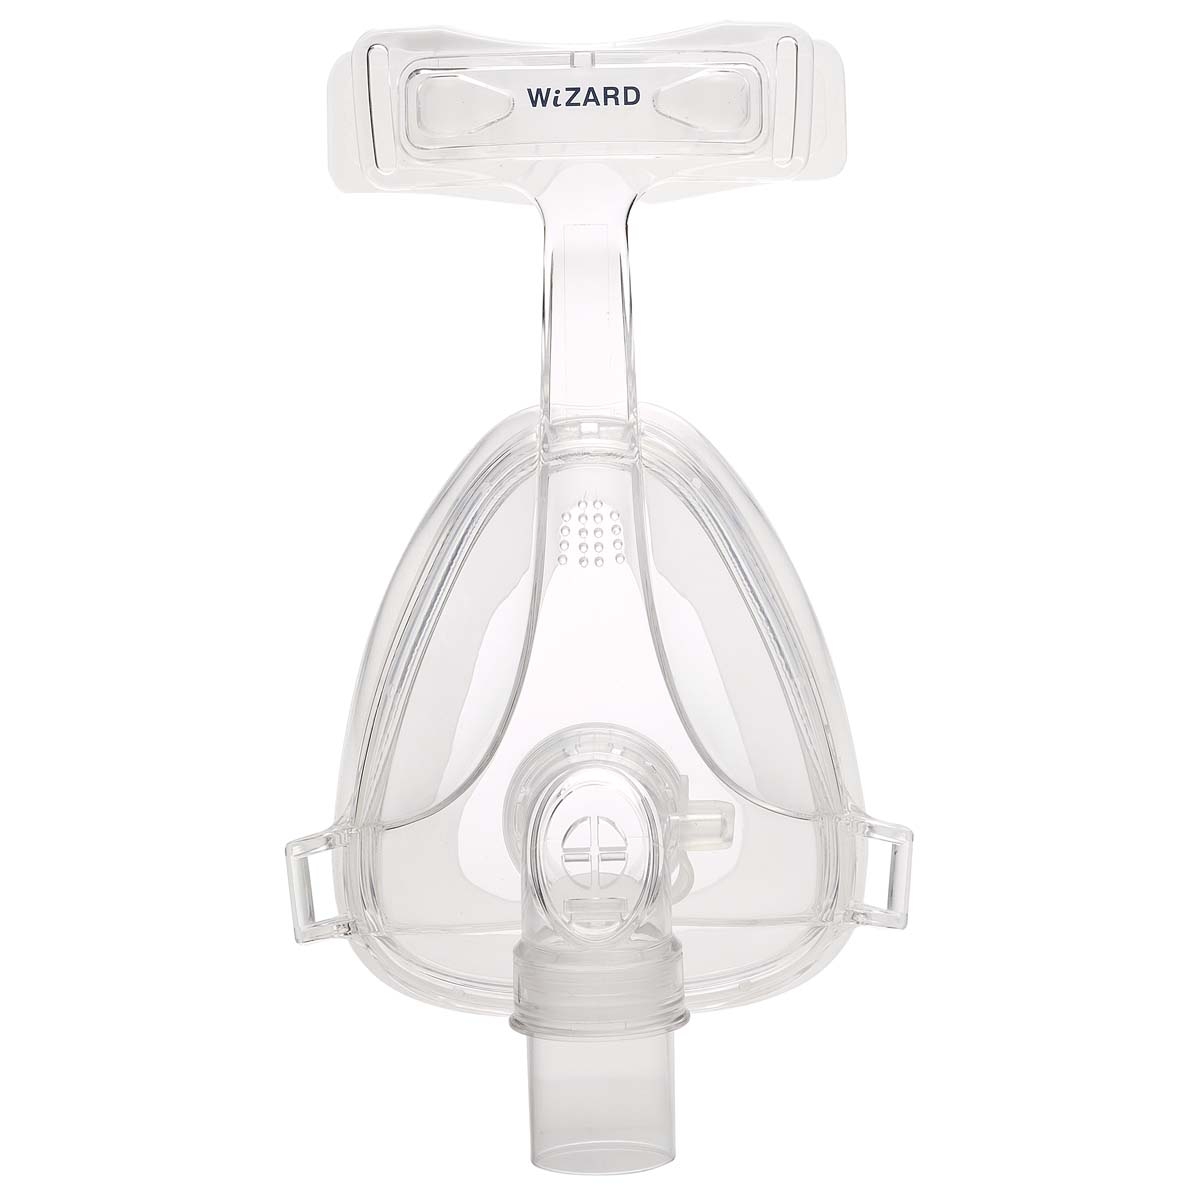 KEGO CPAP Full-Face Mask : # 9N220003 WiZARD 220 with Headgear , Small-/catalog/full_face_mask/kego/wizard-02